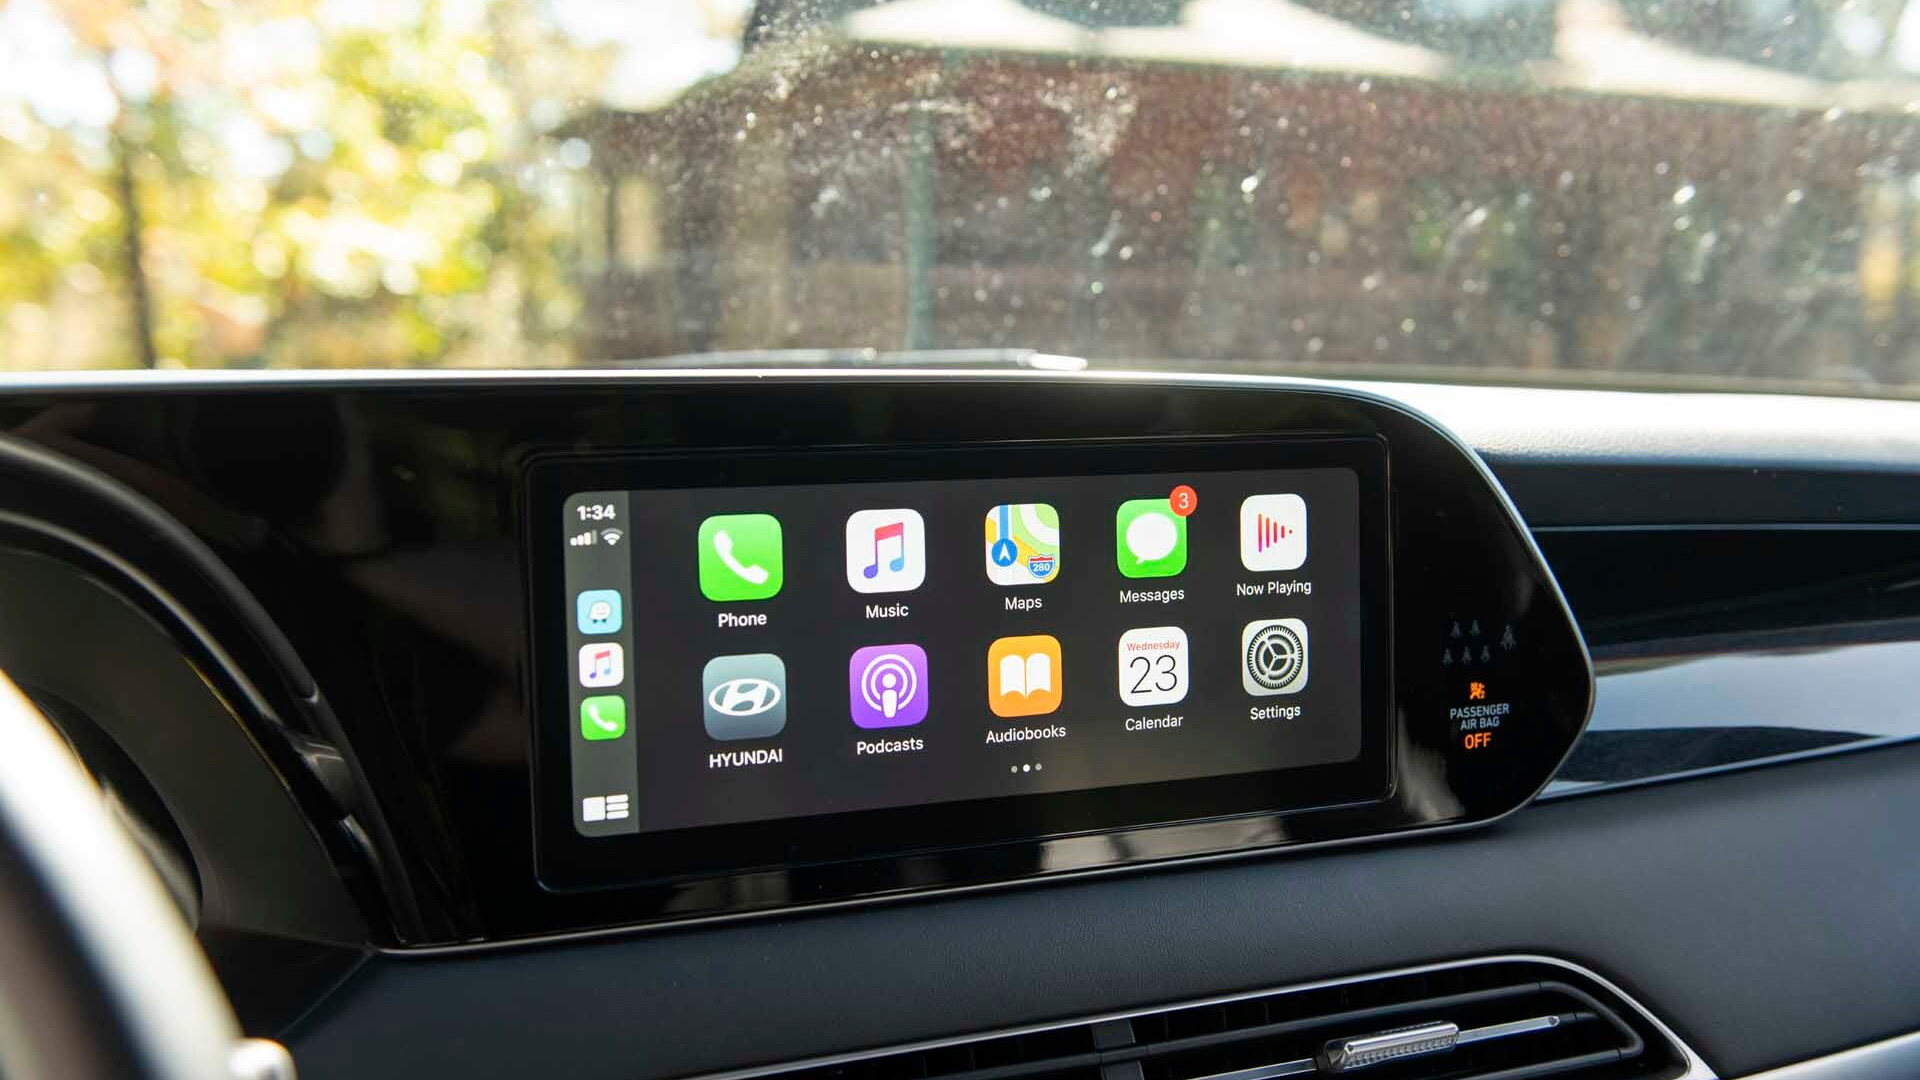 Automakers, here’s how to do Apple CarPlay the right way